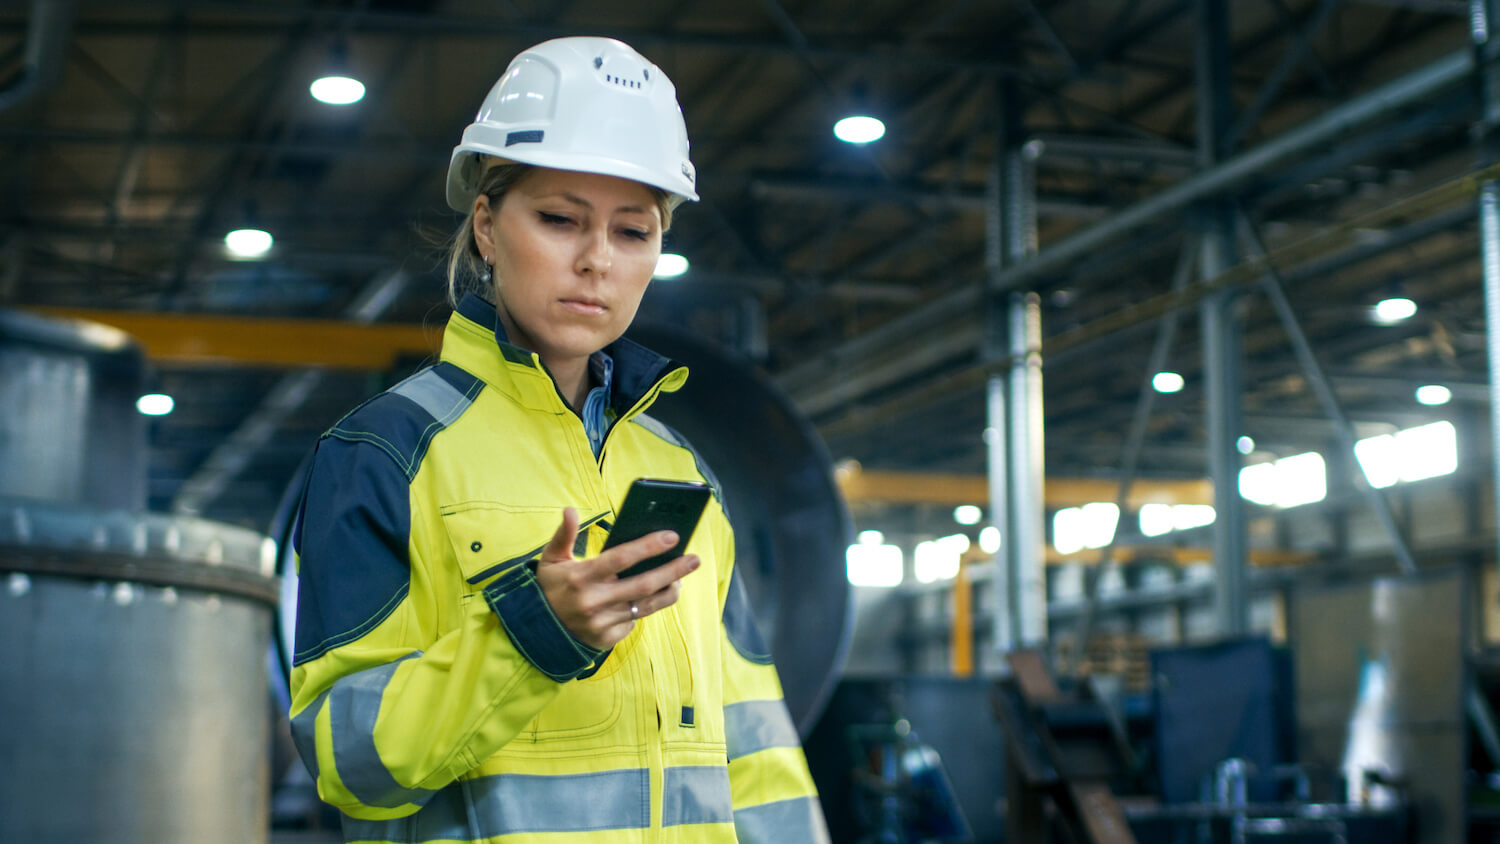 Female Industrial Worker in the Hard Hat Uses Mobile Phone While Walking Through Heavy Industry Manufacturing Factory